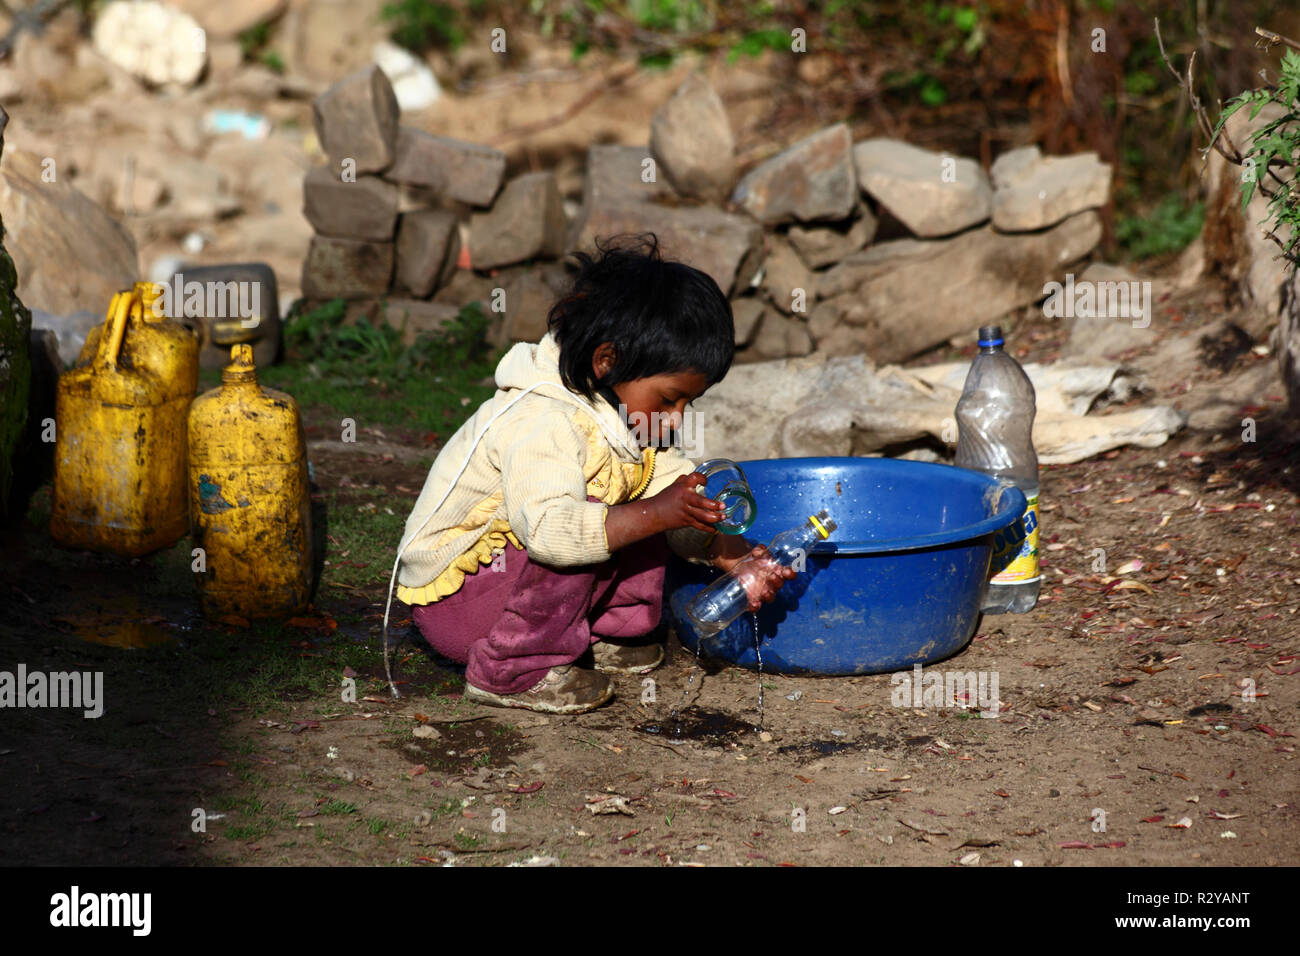 Indigenous child playing with plastic bottle and water in Andean village, Bolivia Stock Photo